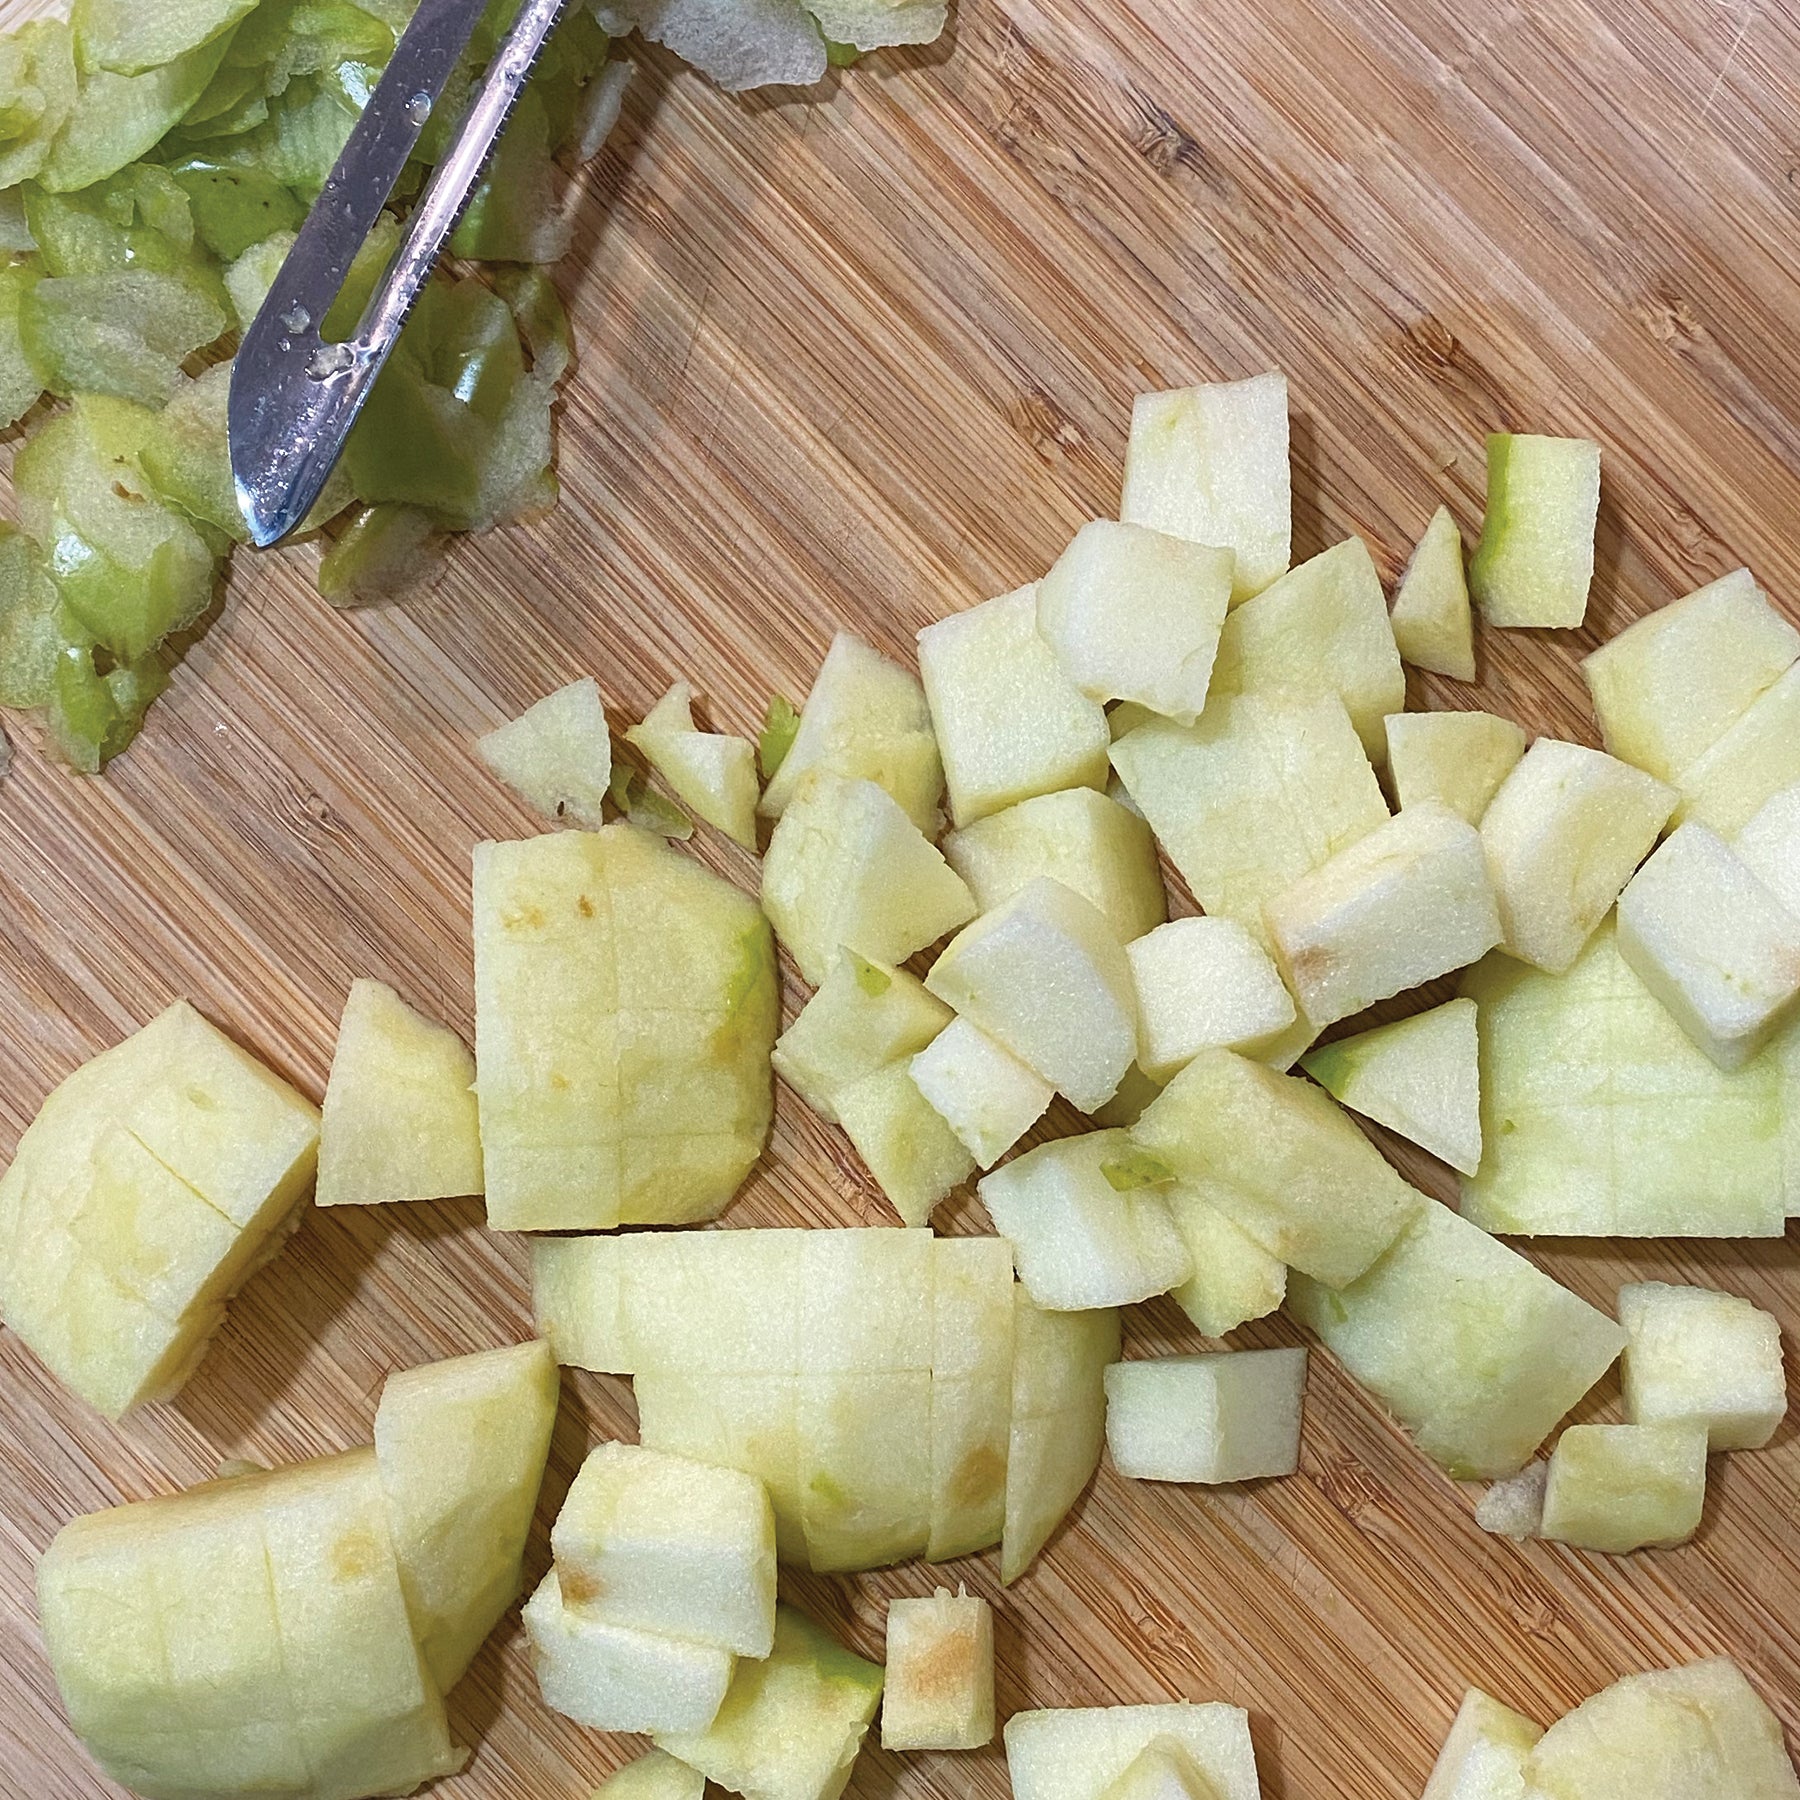 Peels and cut apples on a cutting board 